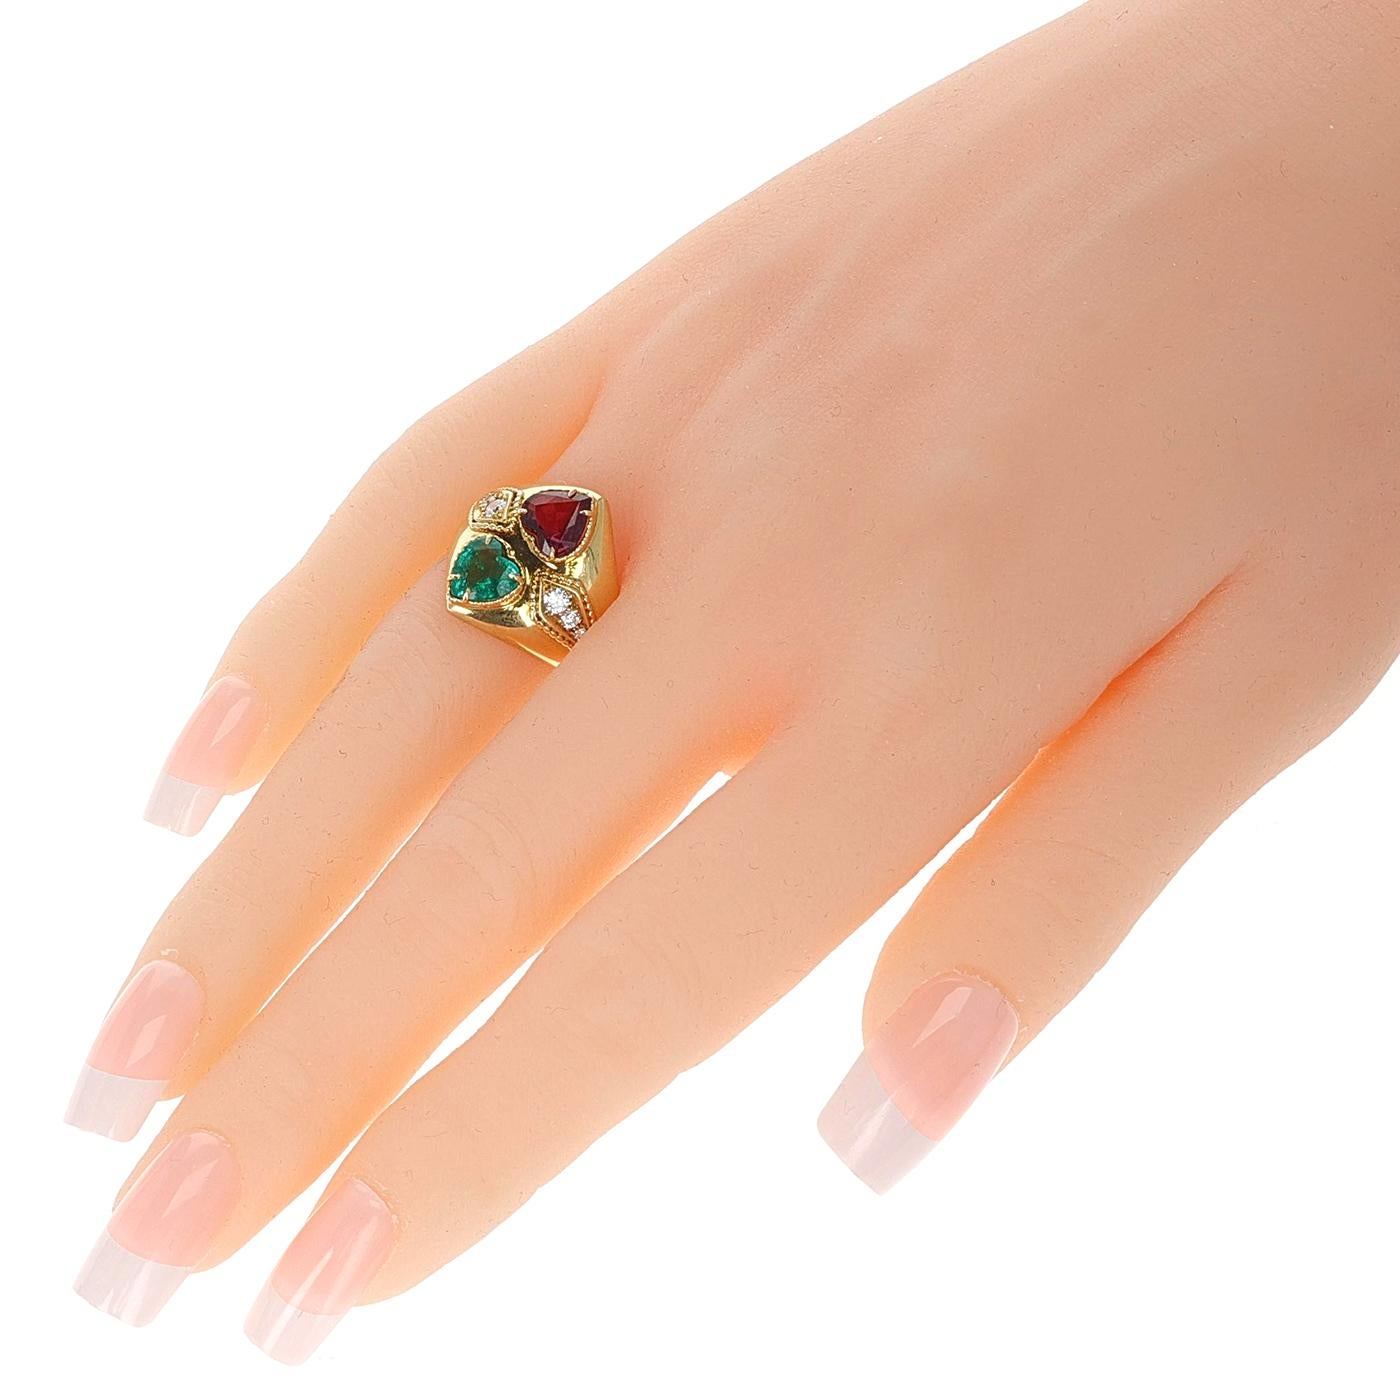 Emerald and Ruby Heart Ring with Diamonds, 18k In Excellent Condition For Sale In New York, NY